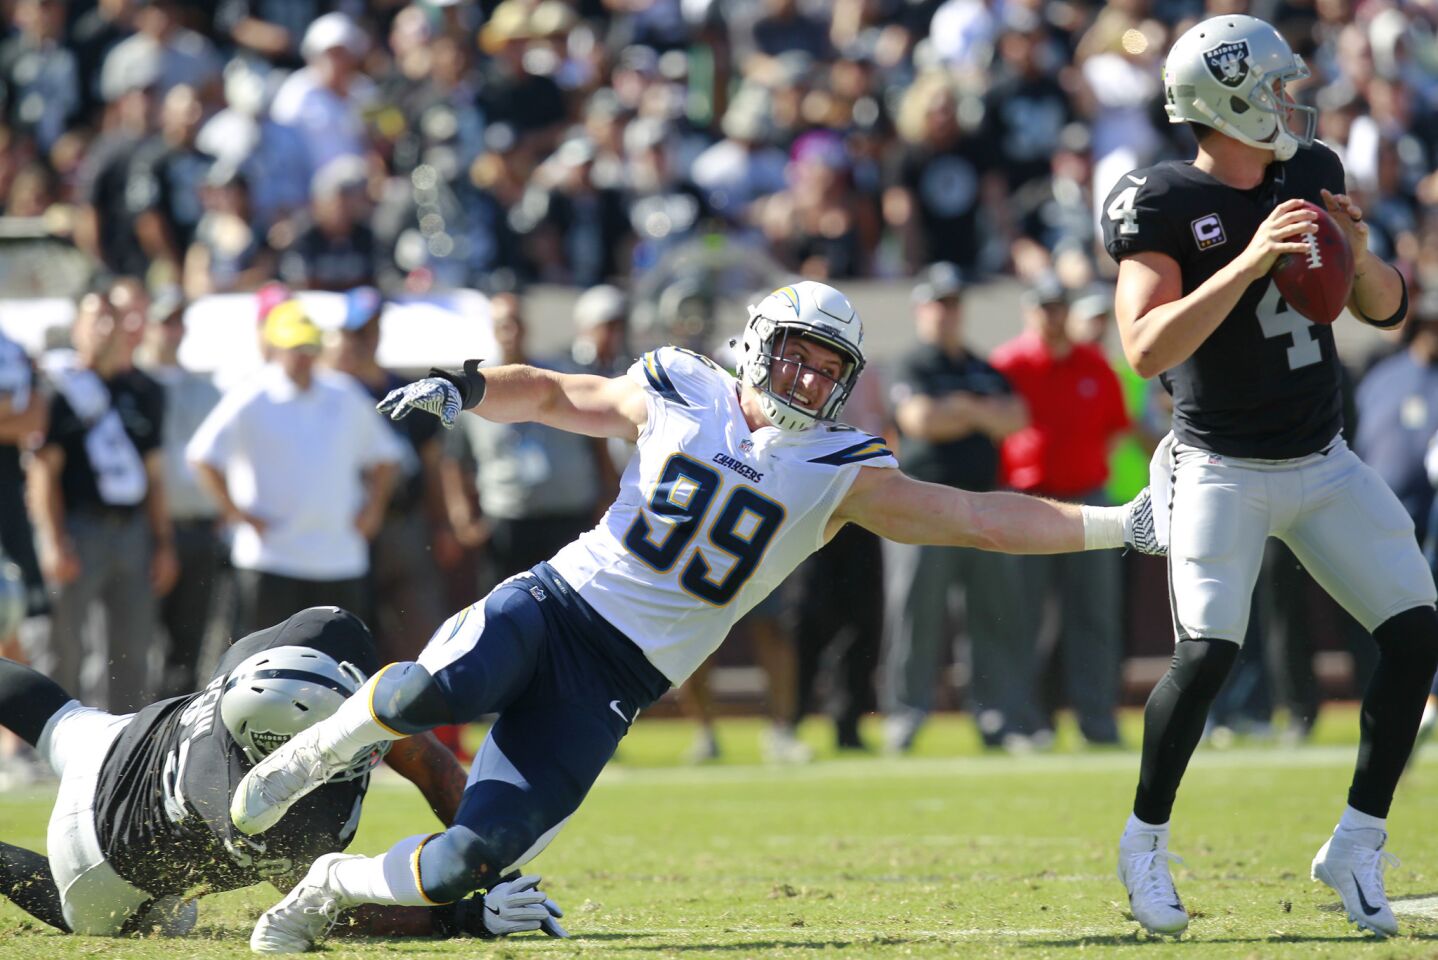 San Diego Chargers Joey Bosa tries to sack Oakland Raiders quarterback Derek Carr in the 2nd quarter in Oakland on Oct. 9, 2016. (Photo by K.C. Alfred/The San Diego Union-Tribune)